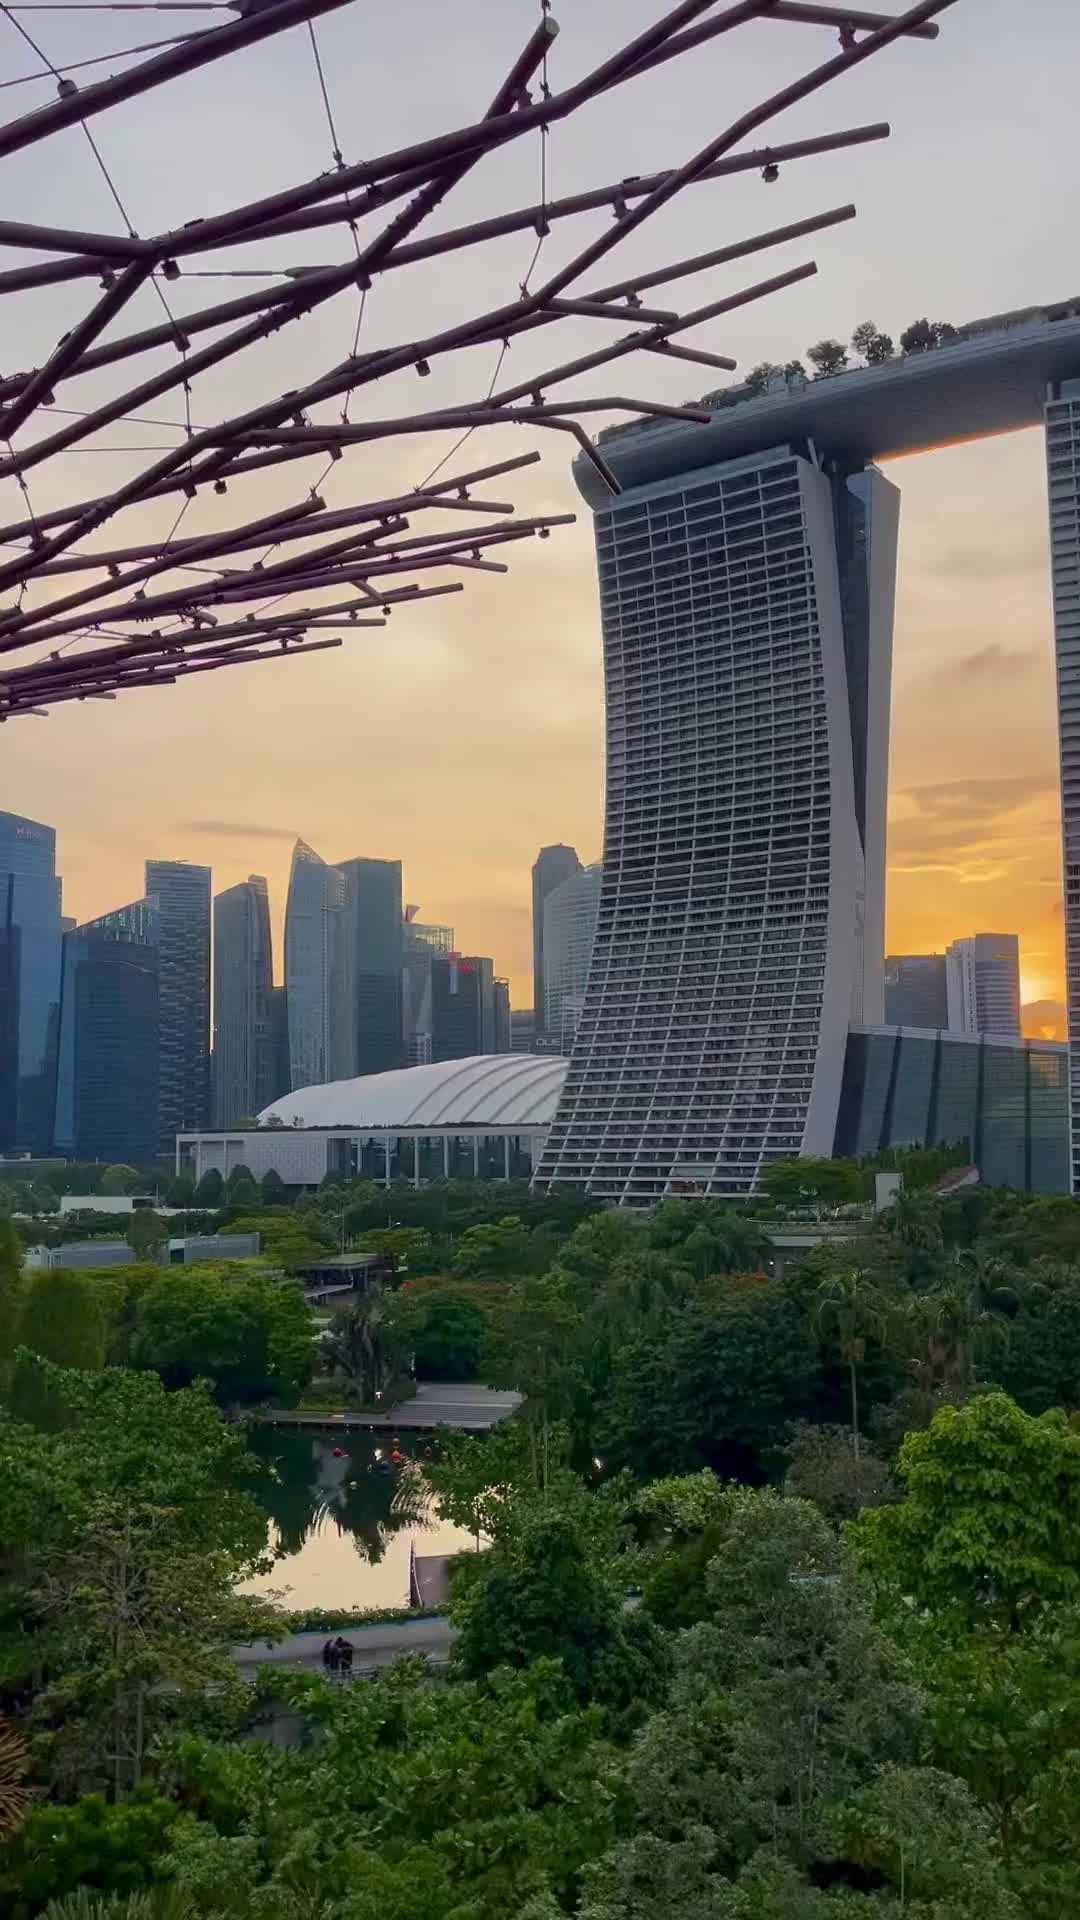 Gorgeous Sunsets at Gardens by the Bay, Singapore